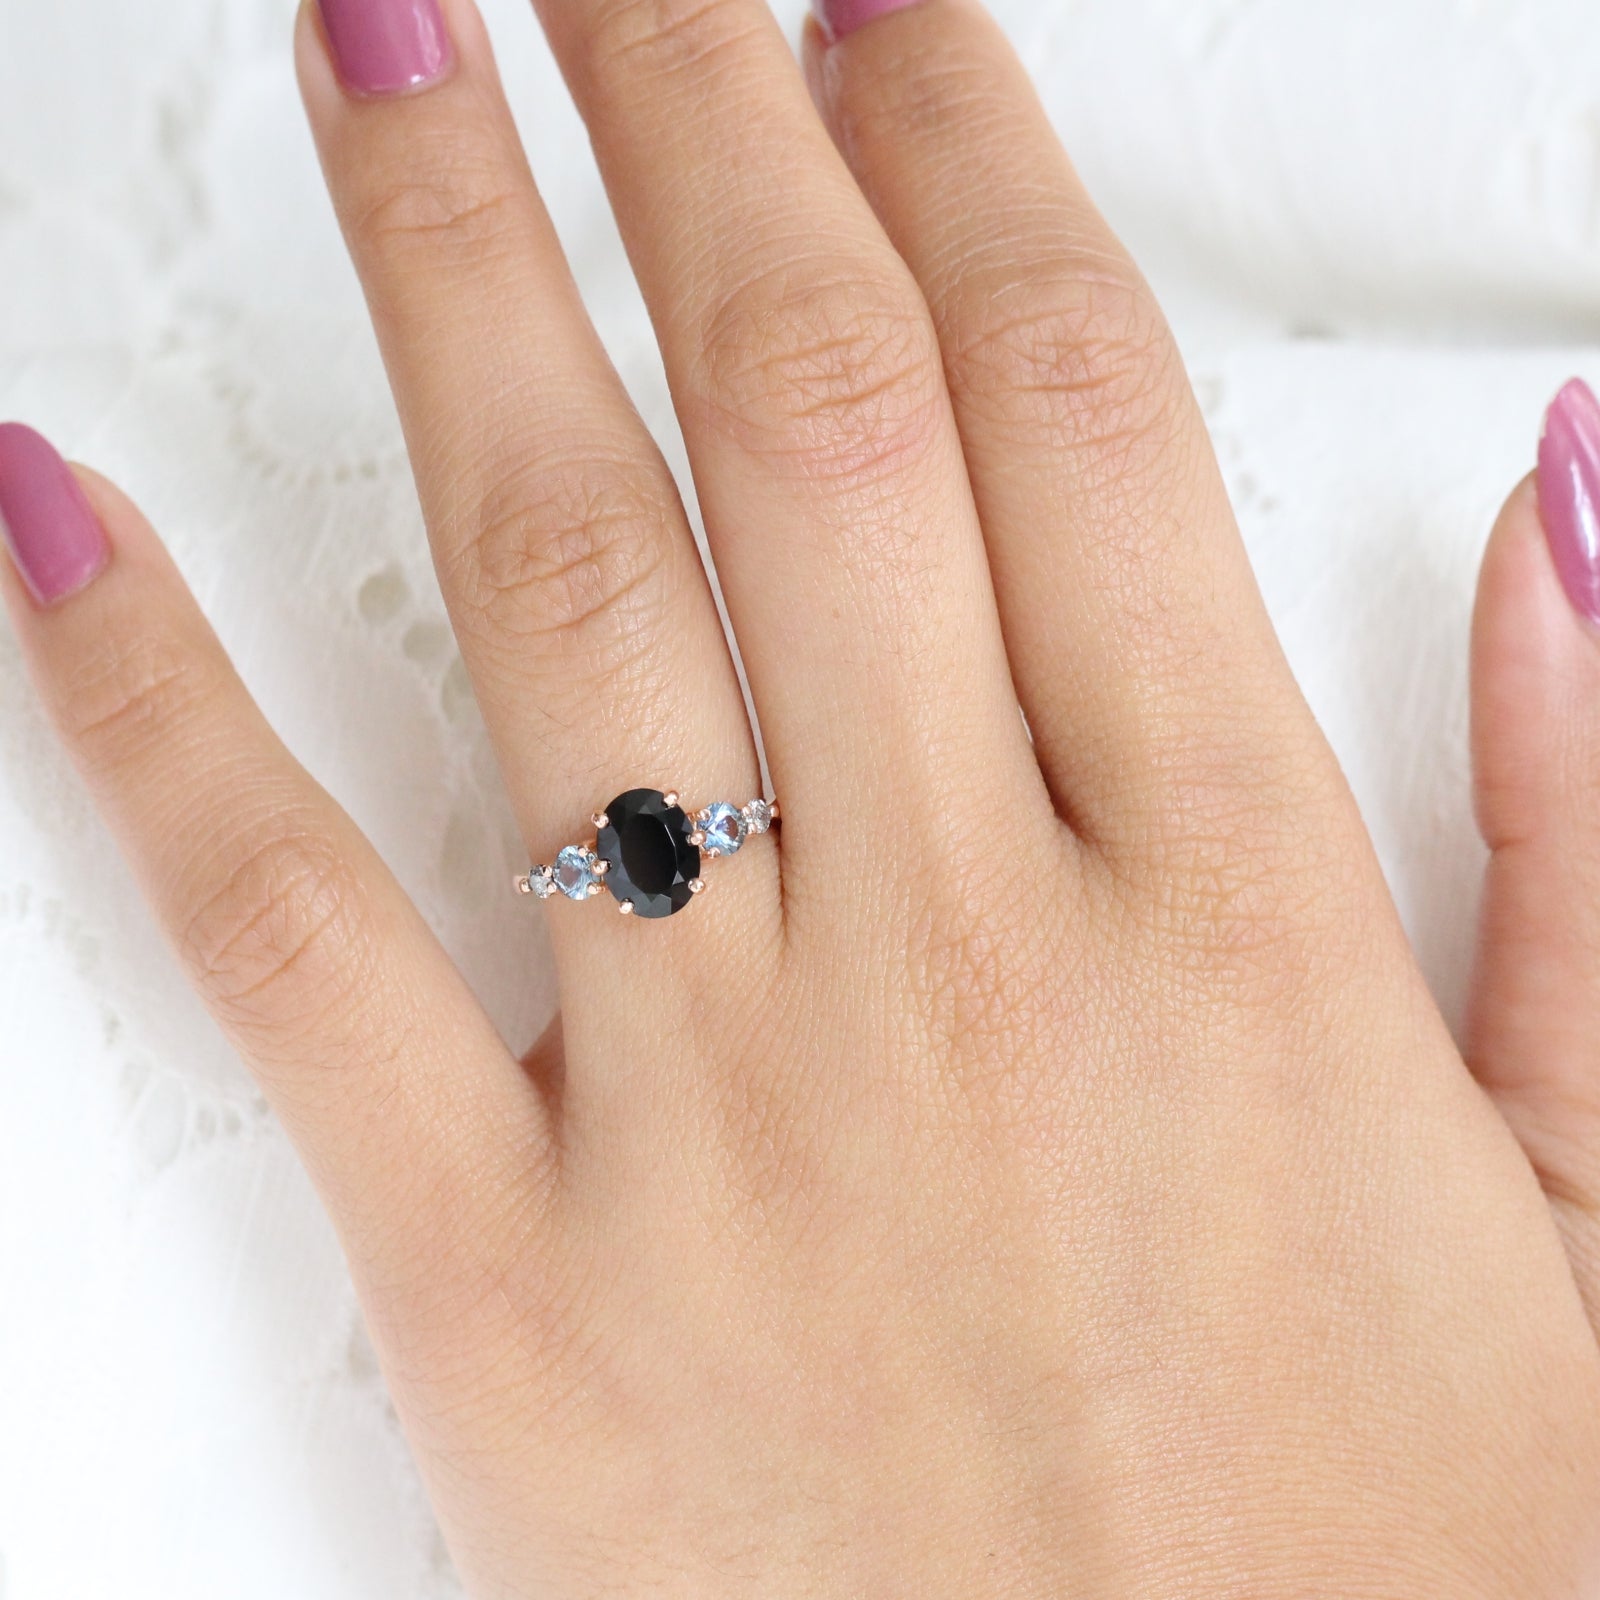 Black Spinel and Montana Sapphire Engagement Ring in Rose Gold 5 Stone Diamond Ring by La More Design Jewelry